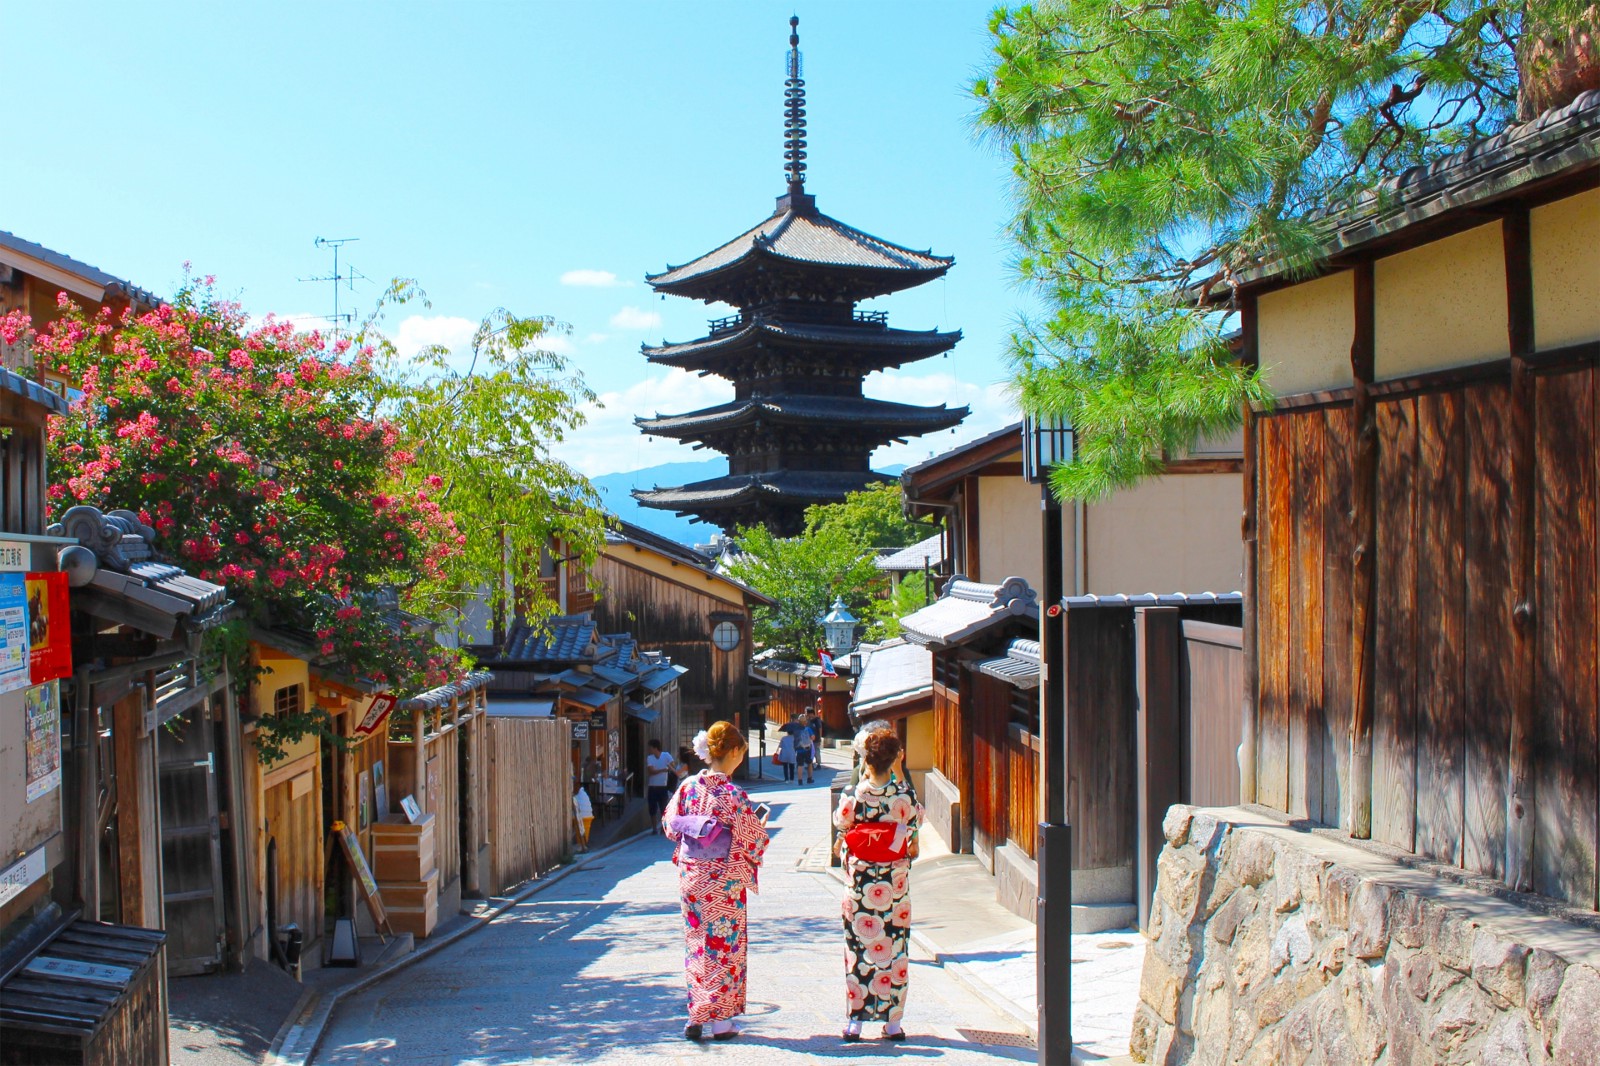 Kyoto Private One Day Tour with Hotel Pick-up from Osaka/Kyoto/Kobe